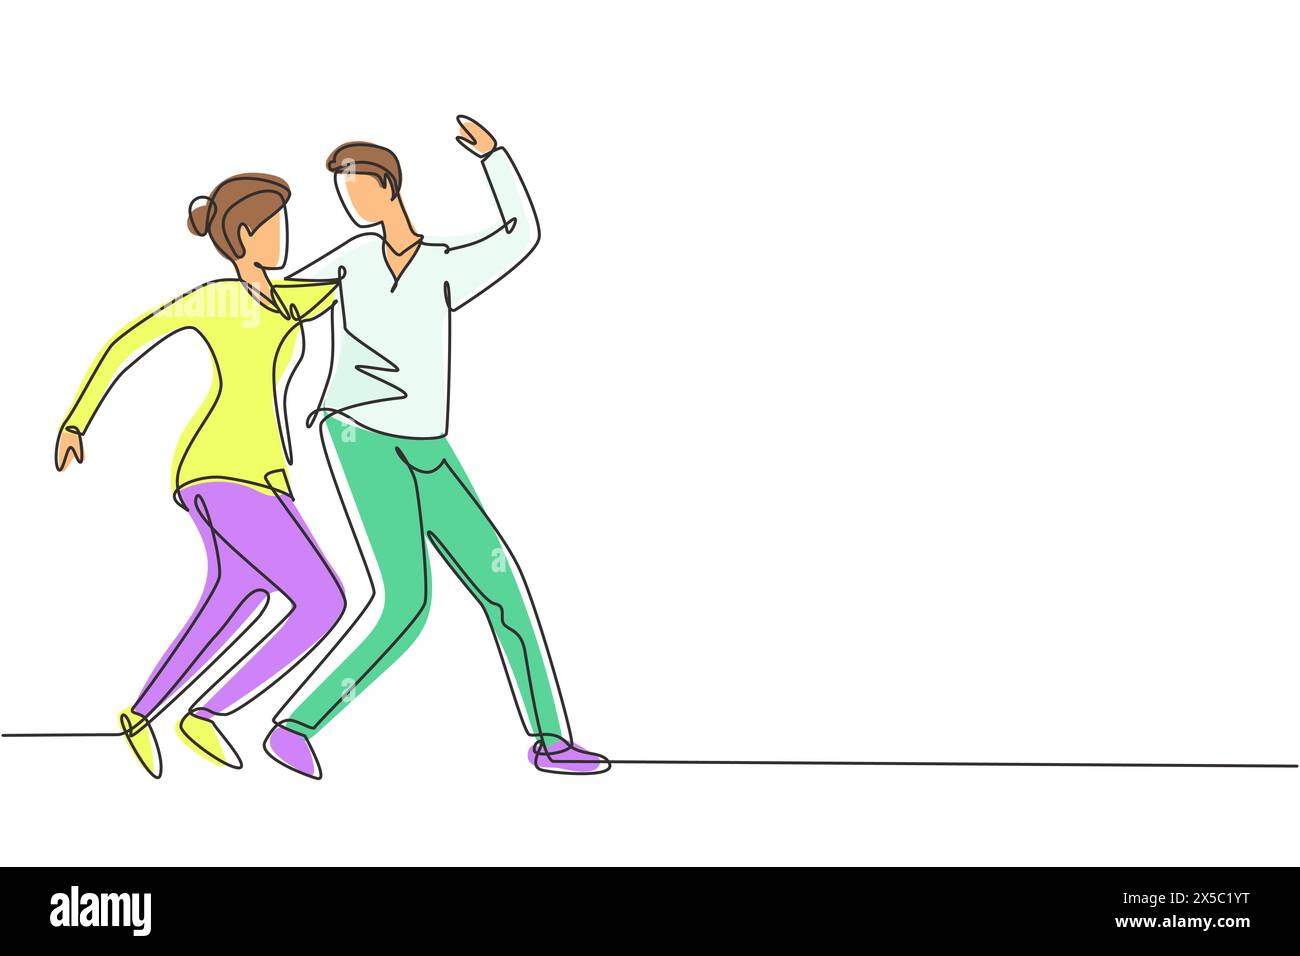 Single one line drawing people dancing salsa. Couples, man and woman in dance. Pairs of dancers with waltz tango and salsa styles moves. Modern contin Stock Vector